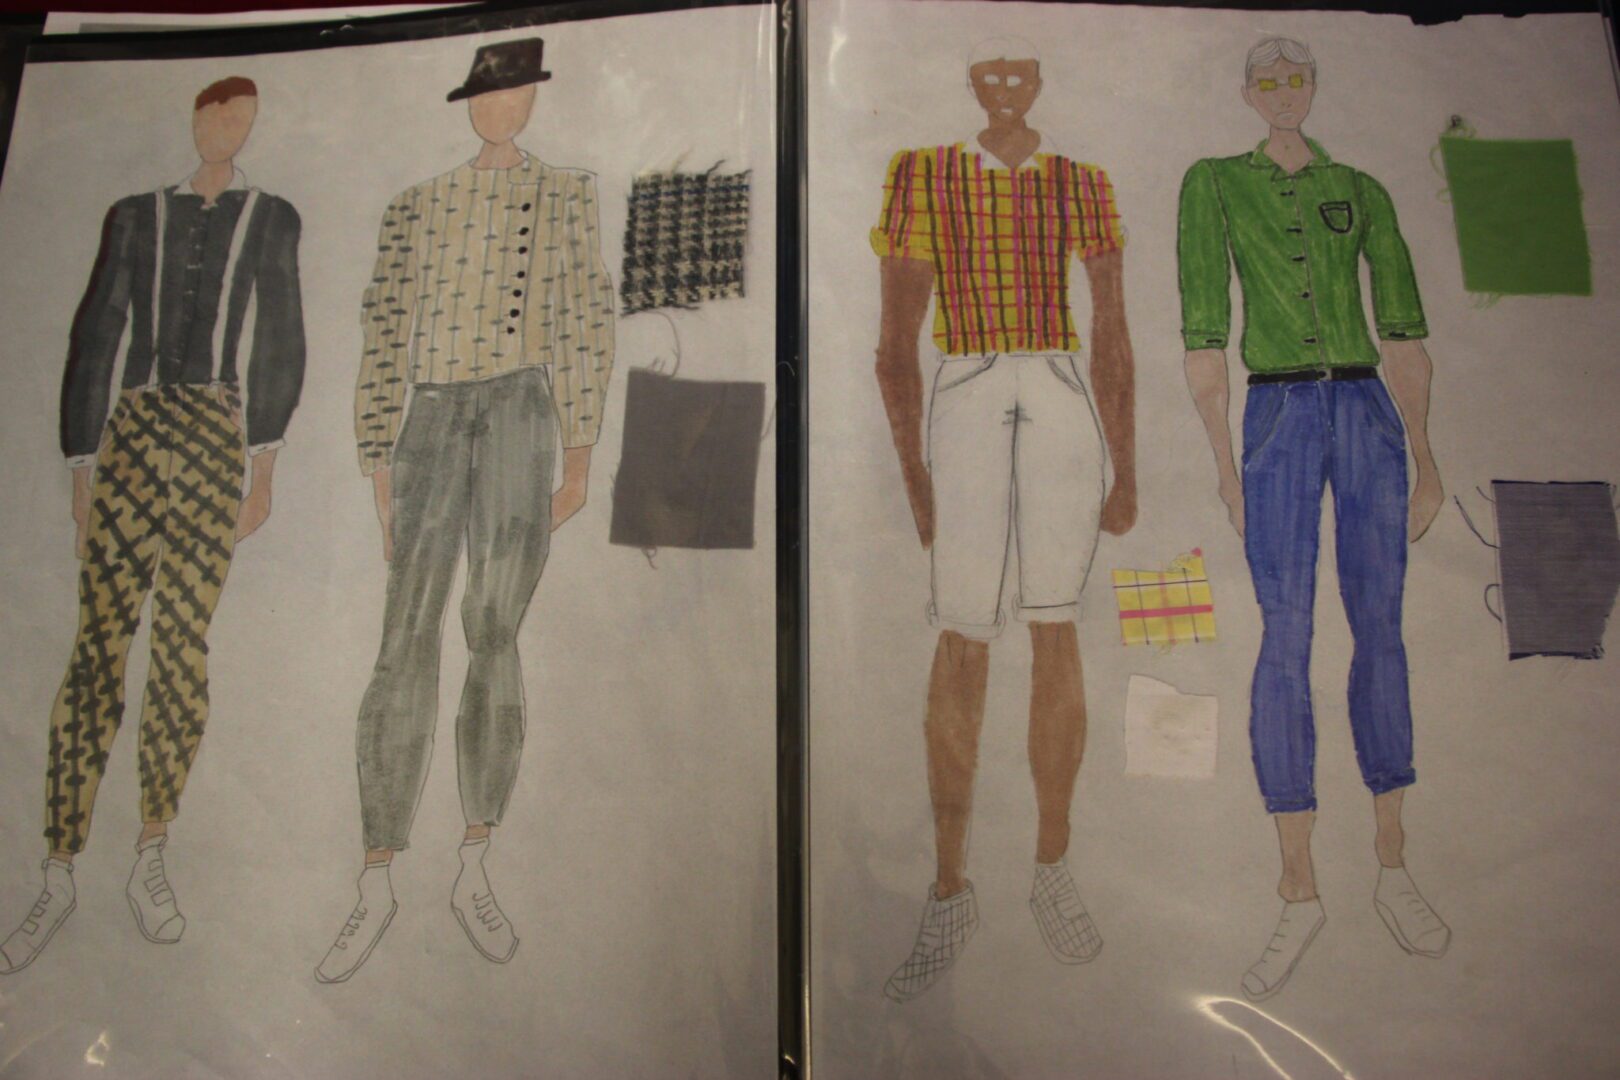 A sketch of a man in a shirt and a pair of pants.